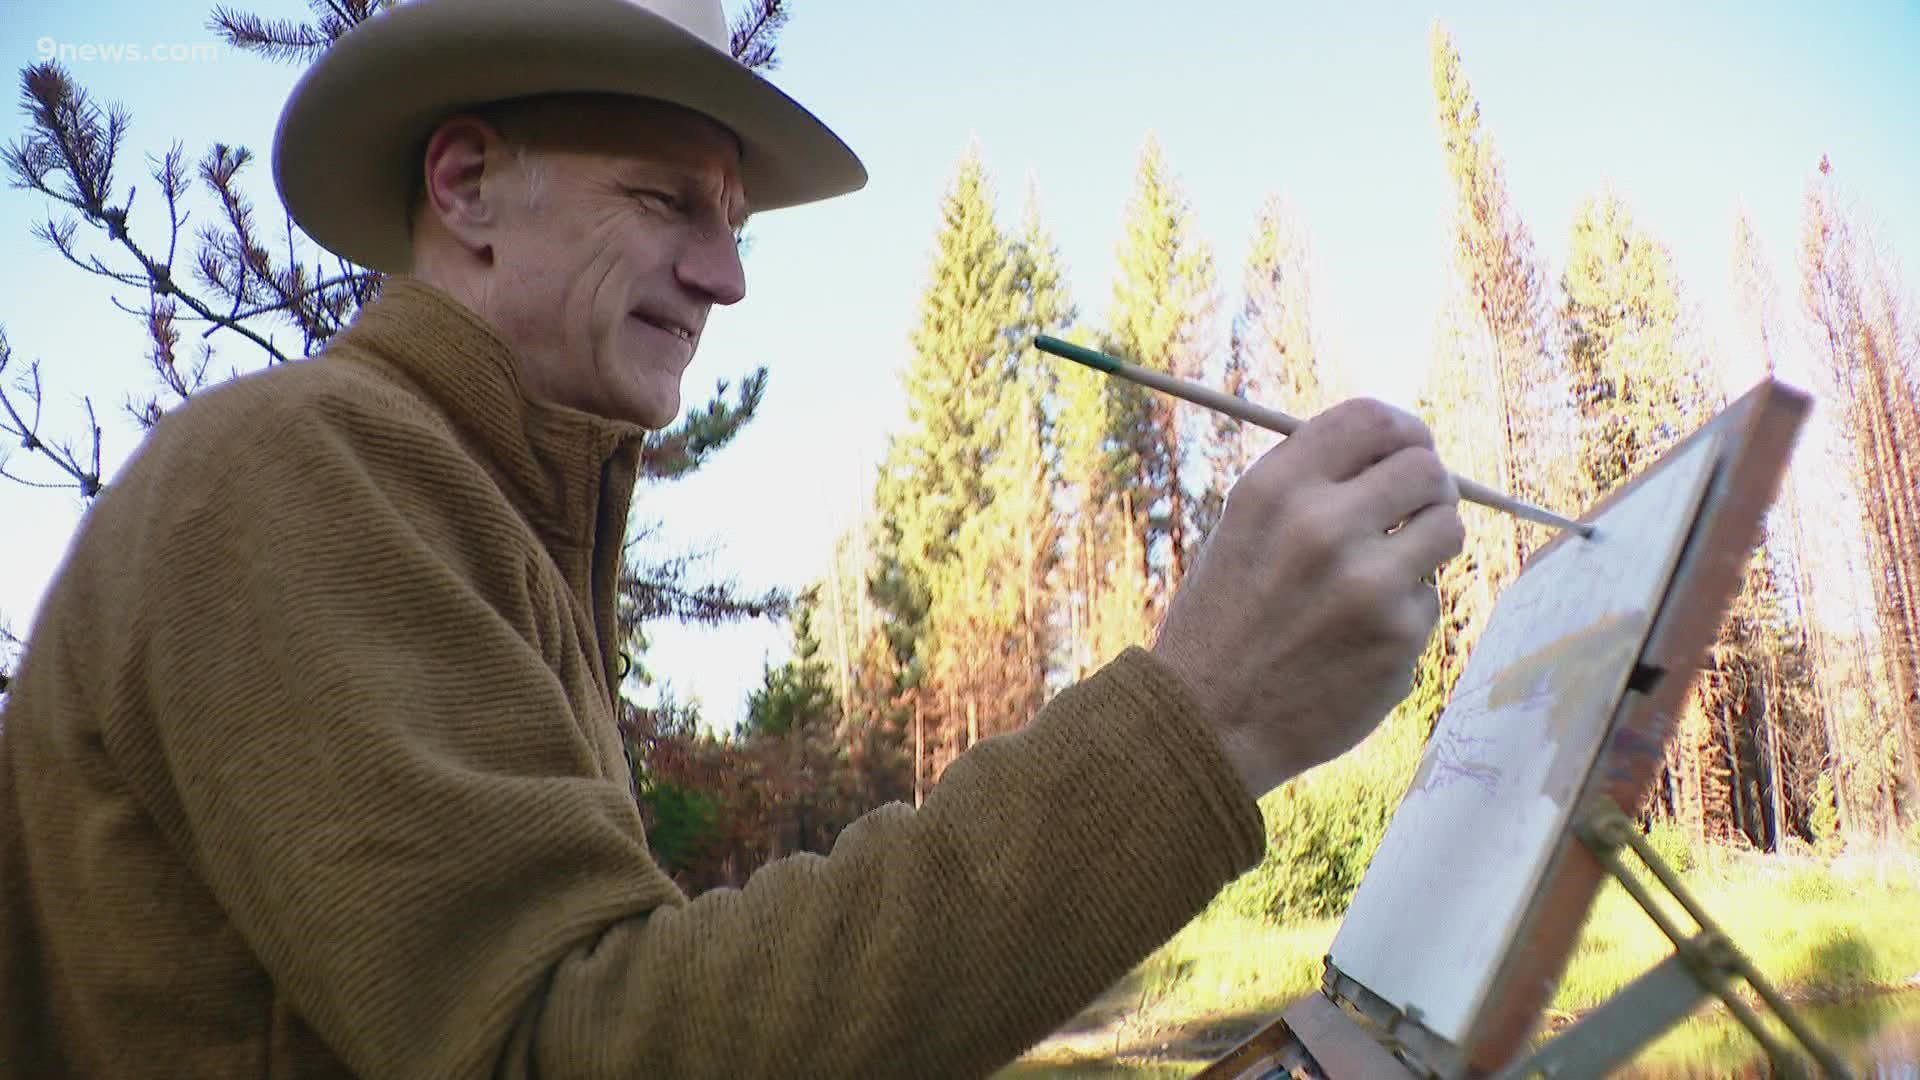 A year after the East Troublesome Fire ripped through Rocky Mountain National Park, a local landscape artist returns to his favorite place.